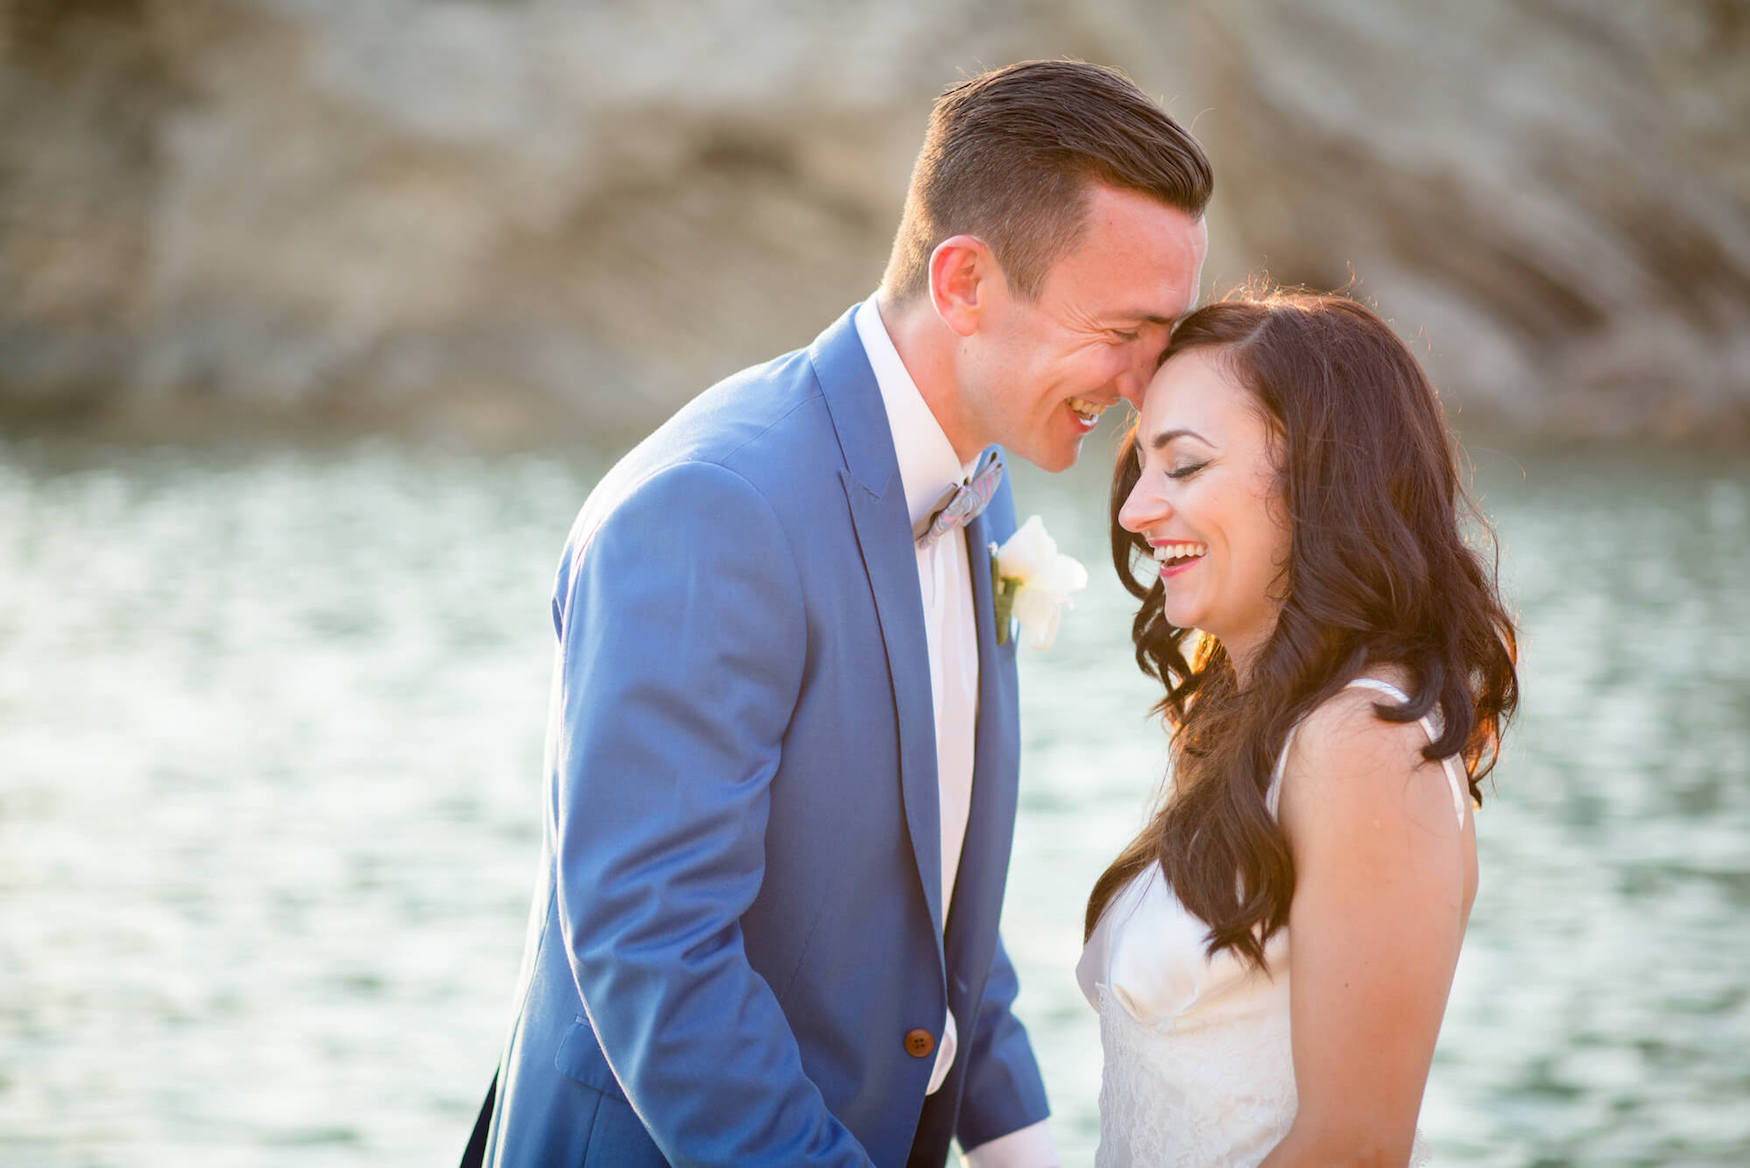 Bride and groom special moments at an Ibiza wedding